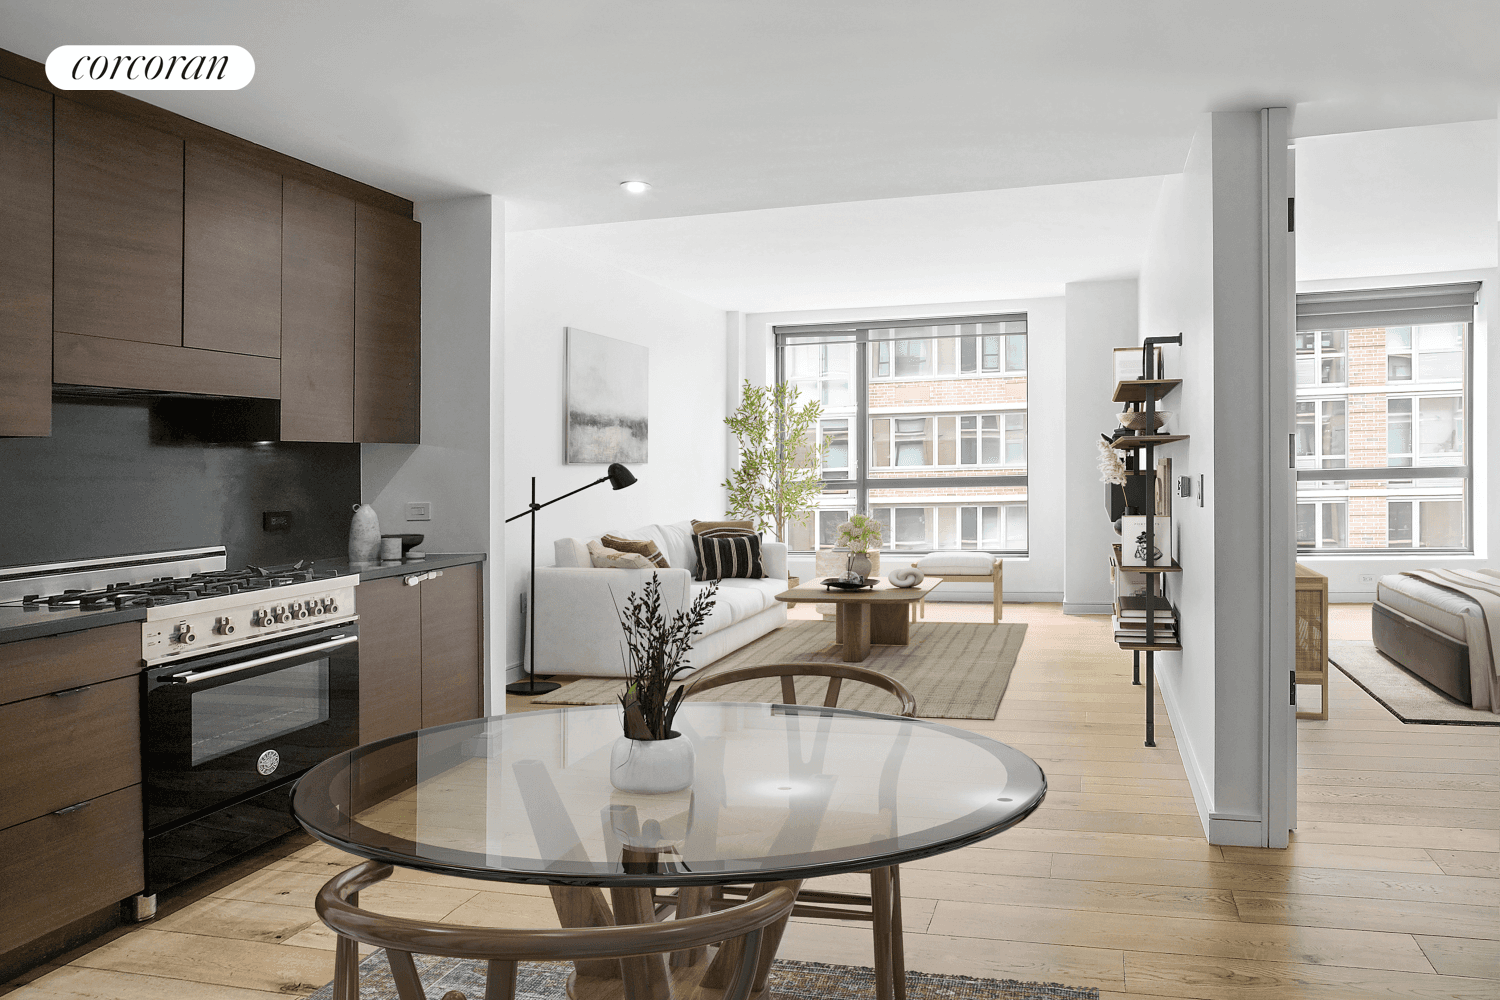 Stylish, bright and gracious one bedroom condo in a phenomenally located, full service luxury building along the HighLine and just a few blocks from Hudson Yards.